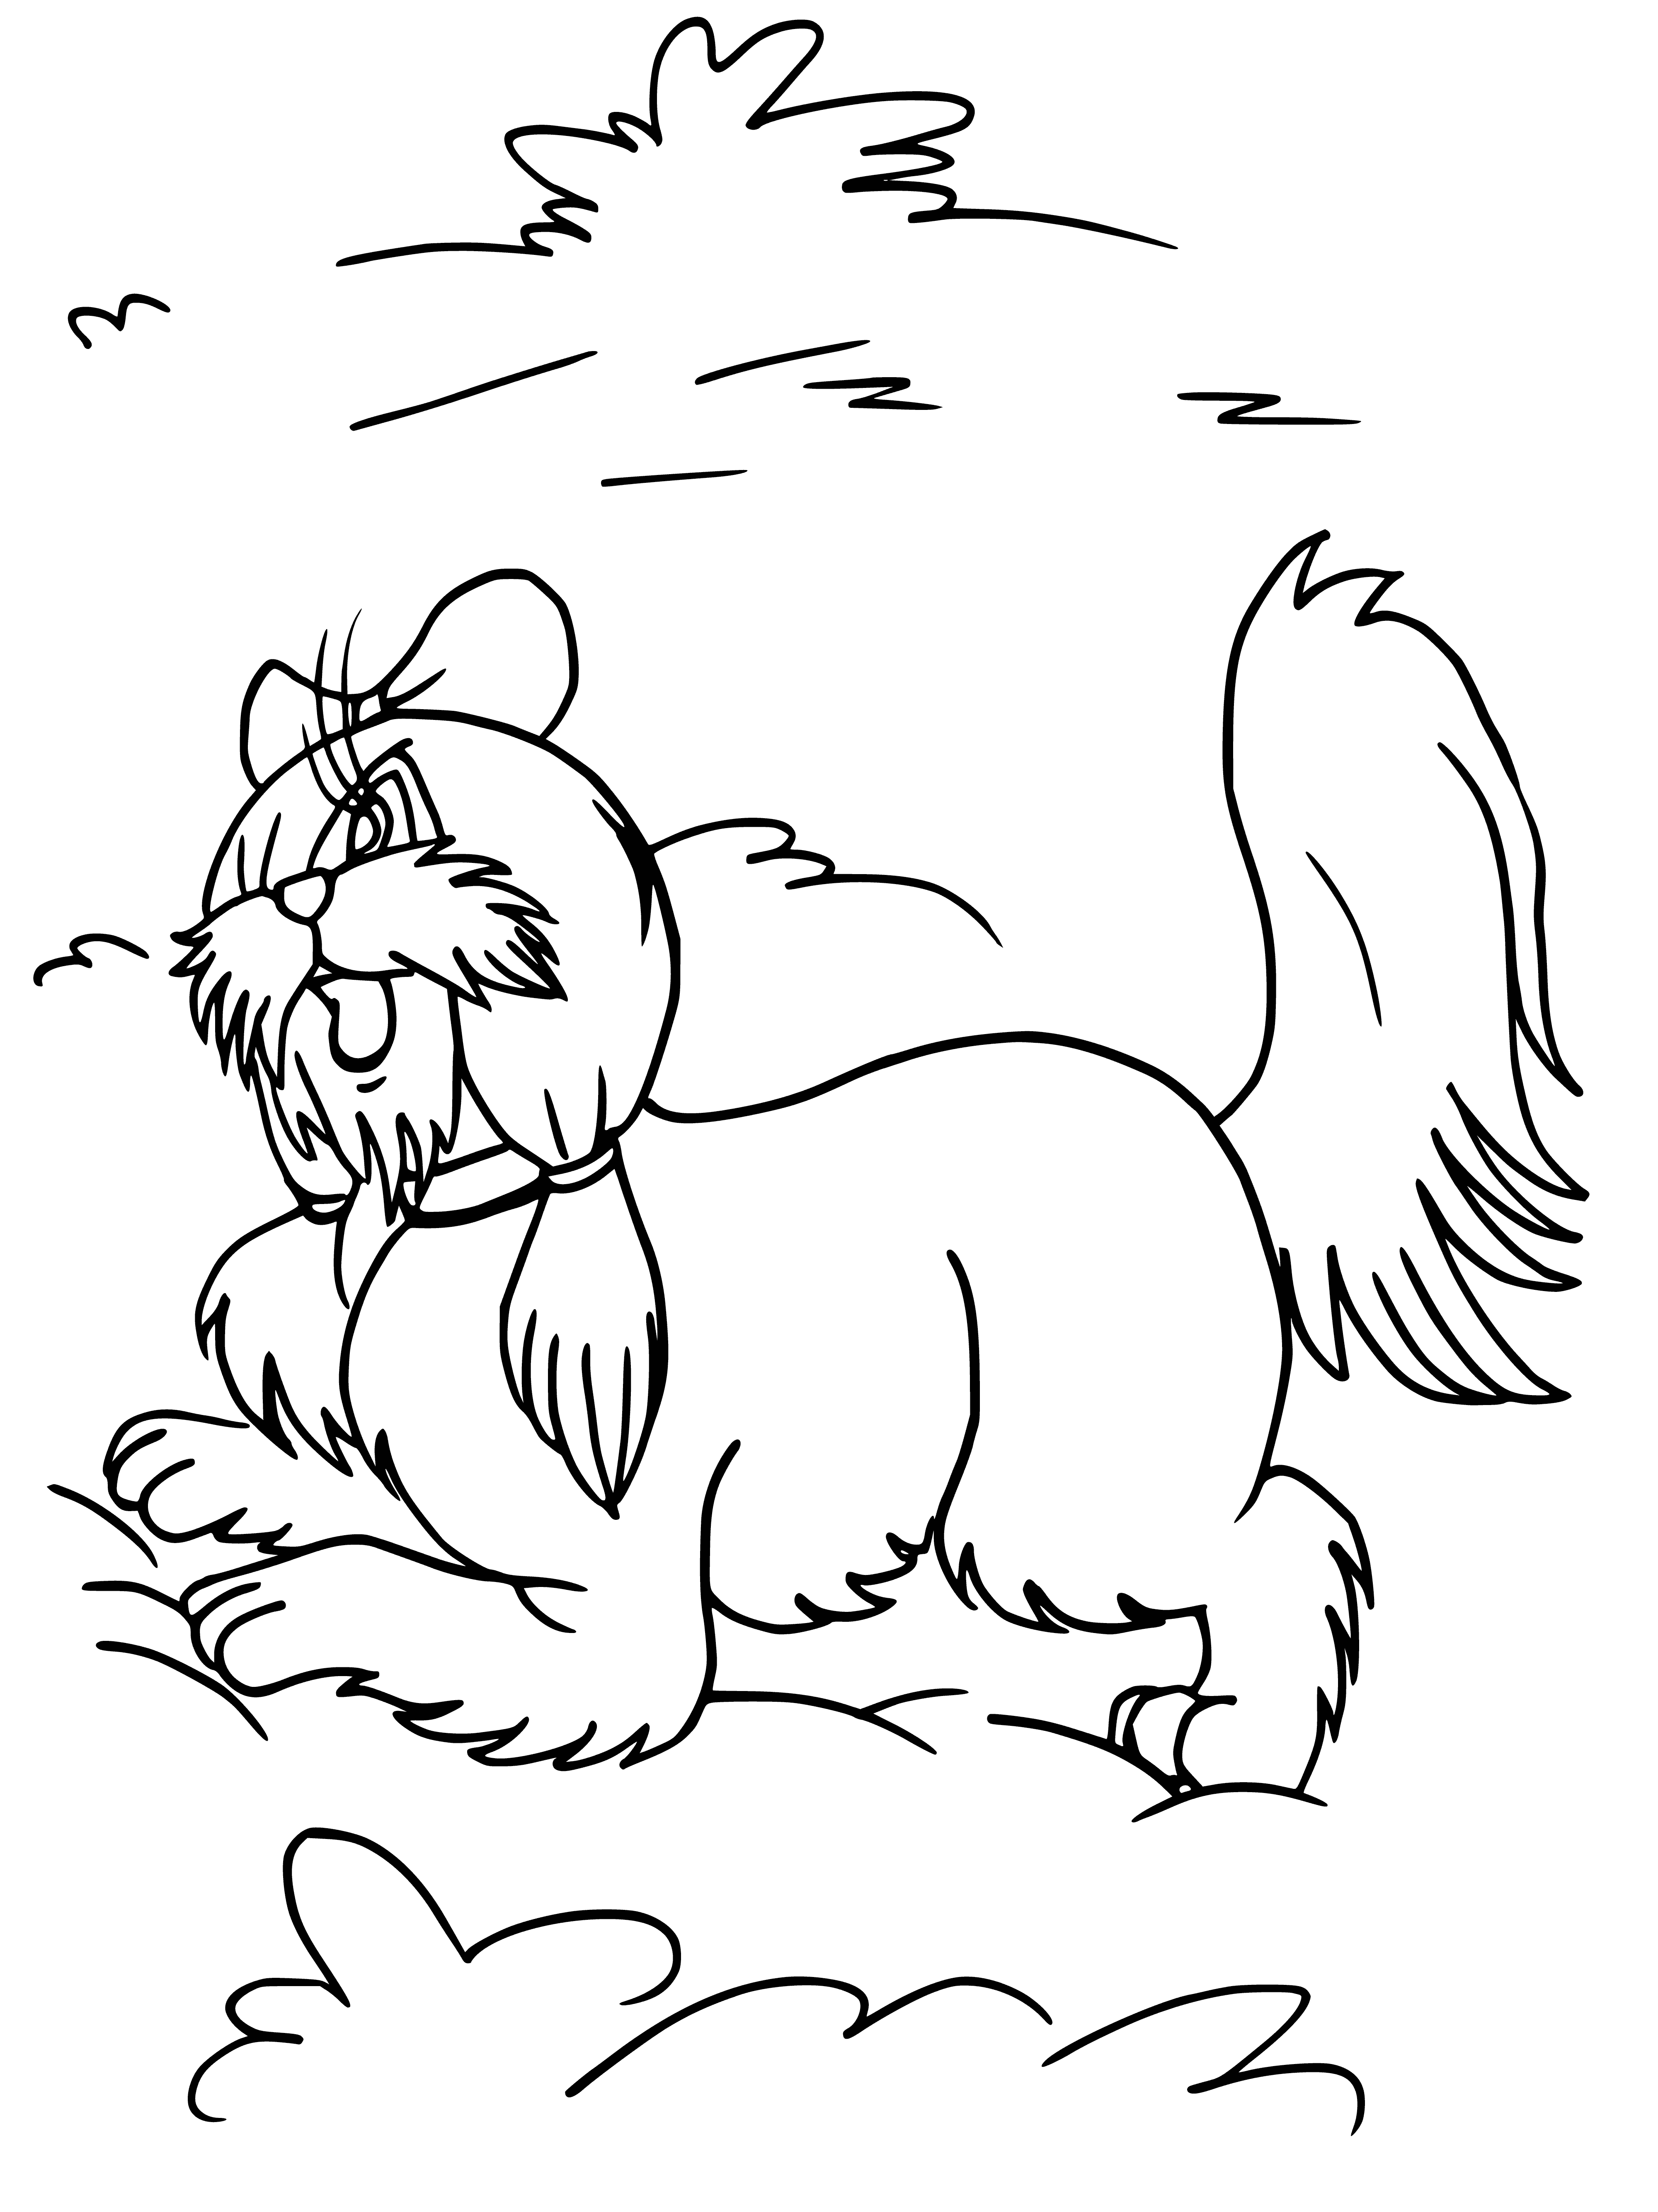 coloring page: Woman and her small tan and white pup, wearing boots, snuggle up in her light dress and crown.